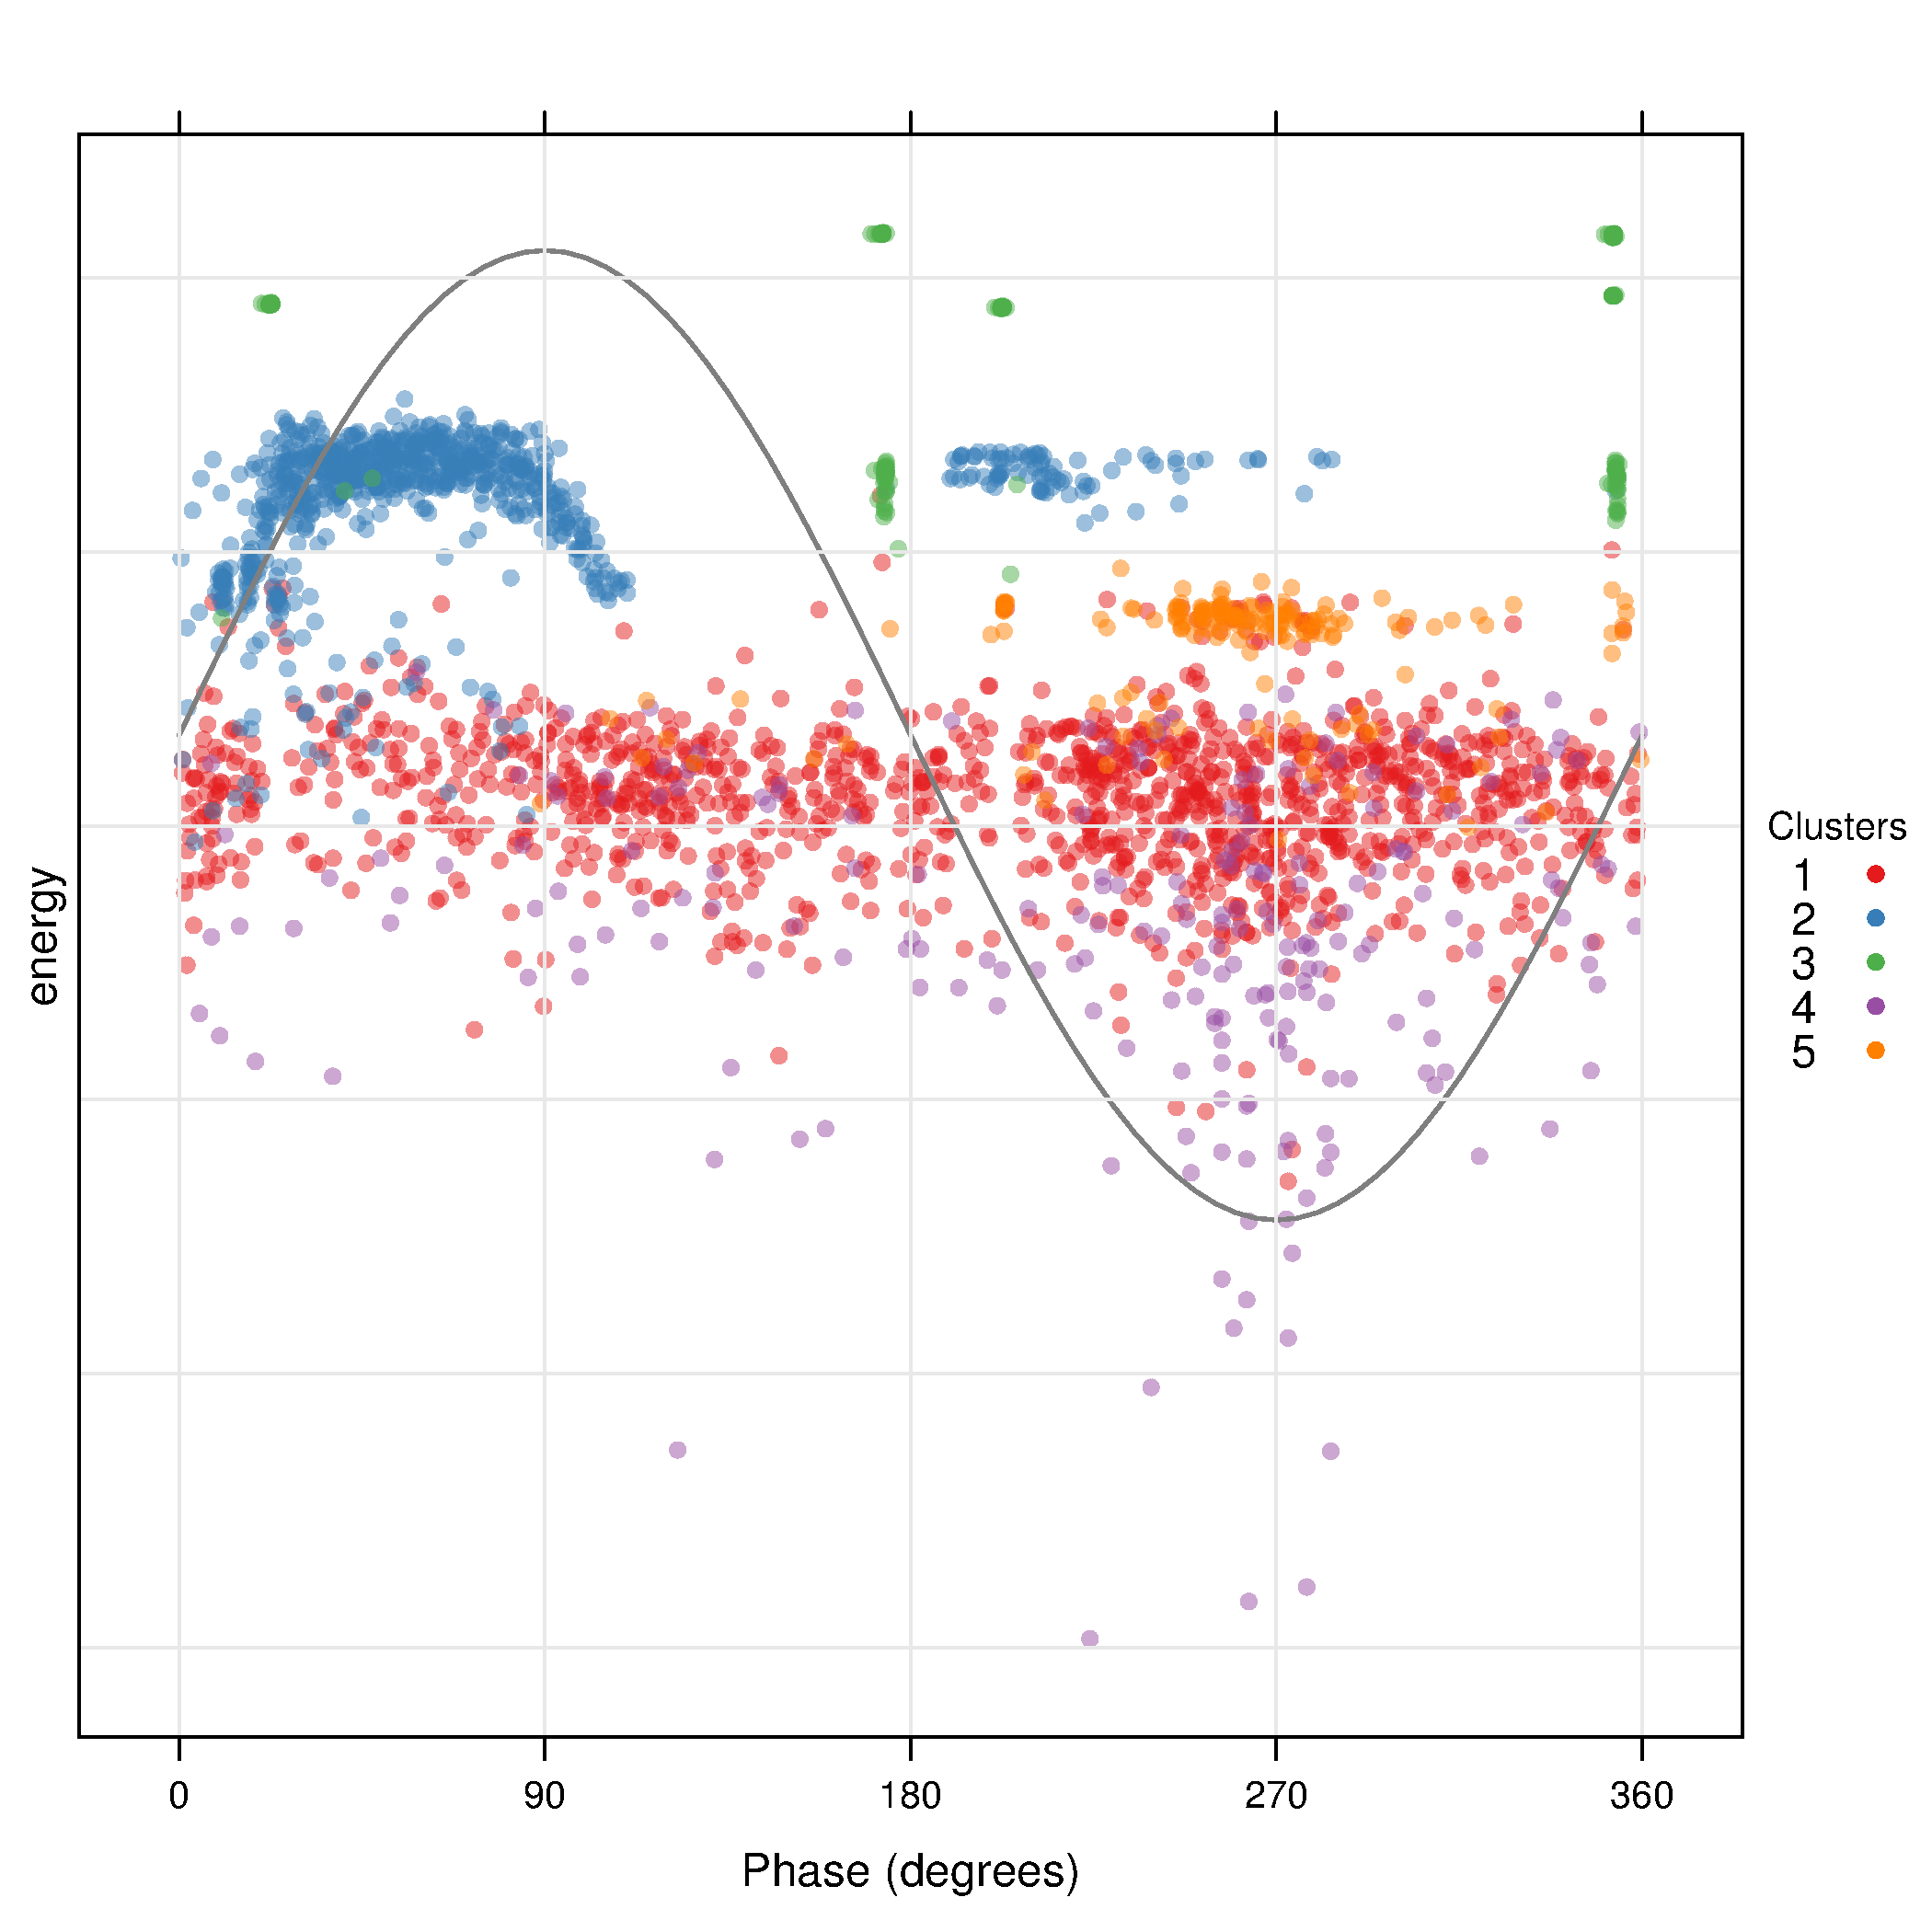 clusterScatterPlot.png